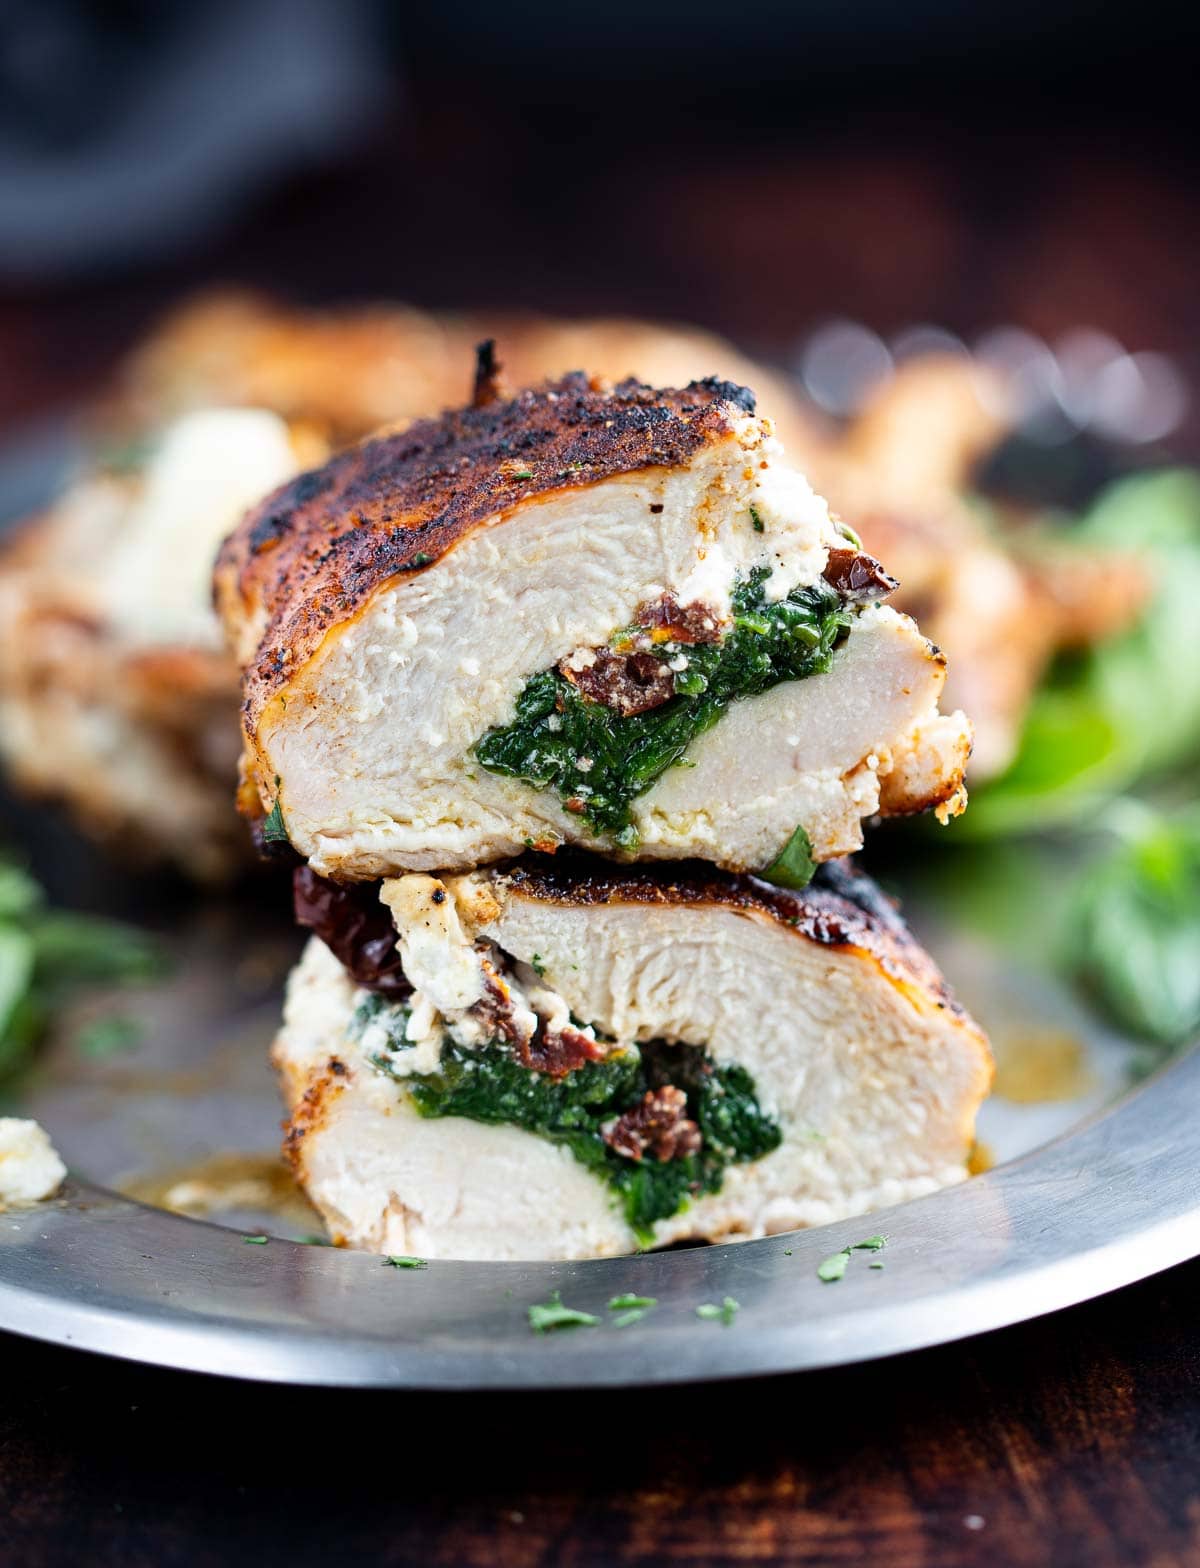 Two halves of grilled chicken breasts stuffed with goat cheese, spinach, and sun-dried tomatoes